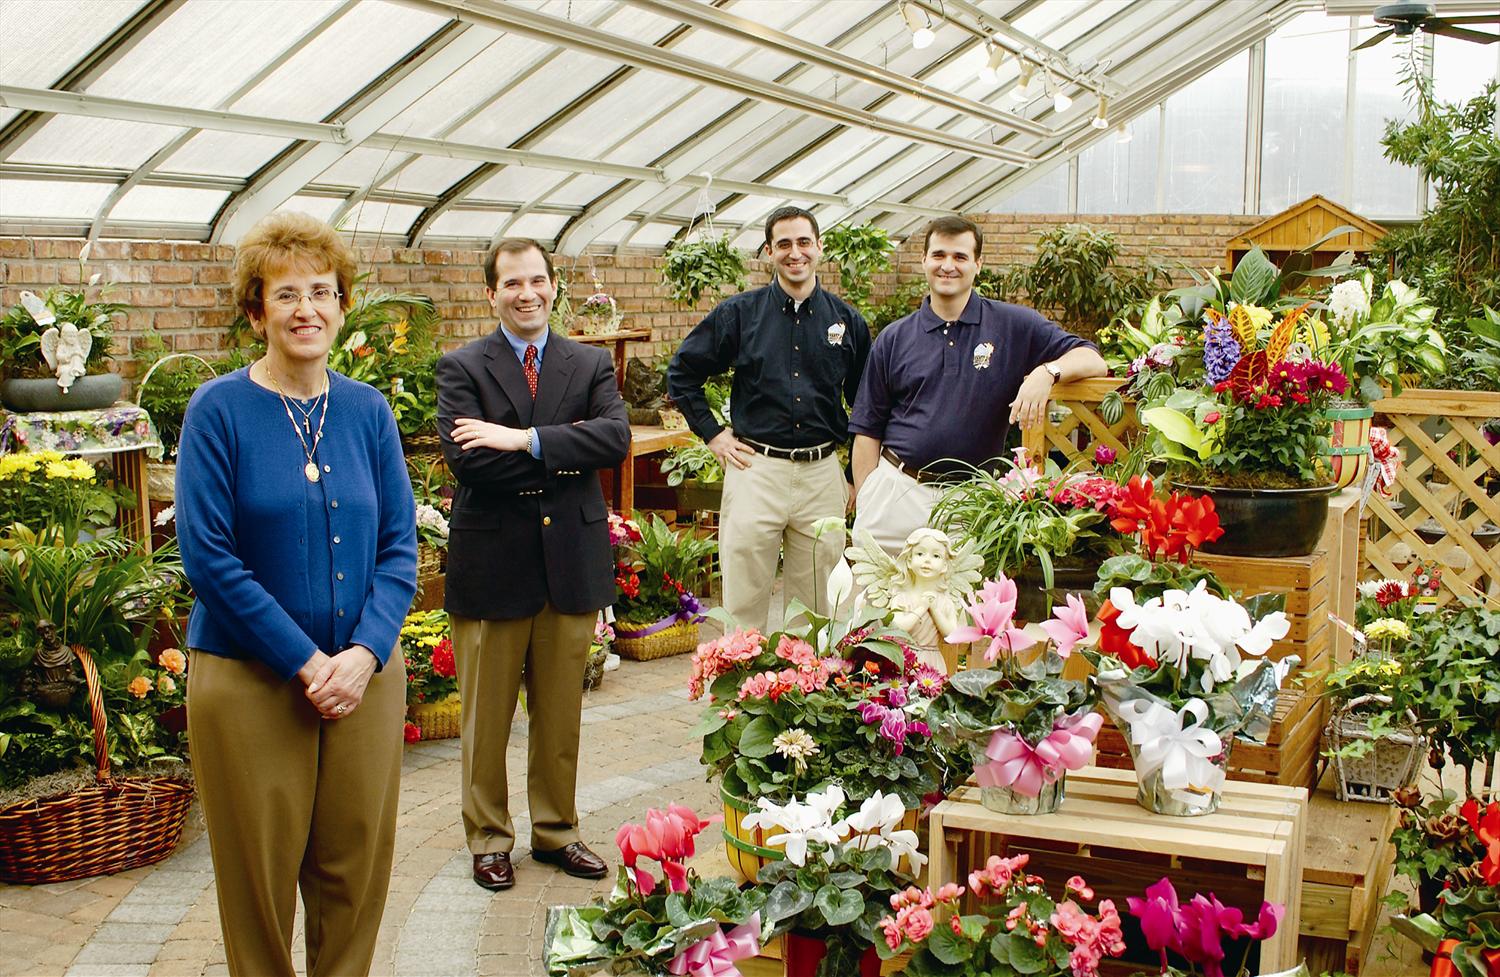 Flower Shops For Any Special Occasion